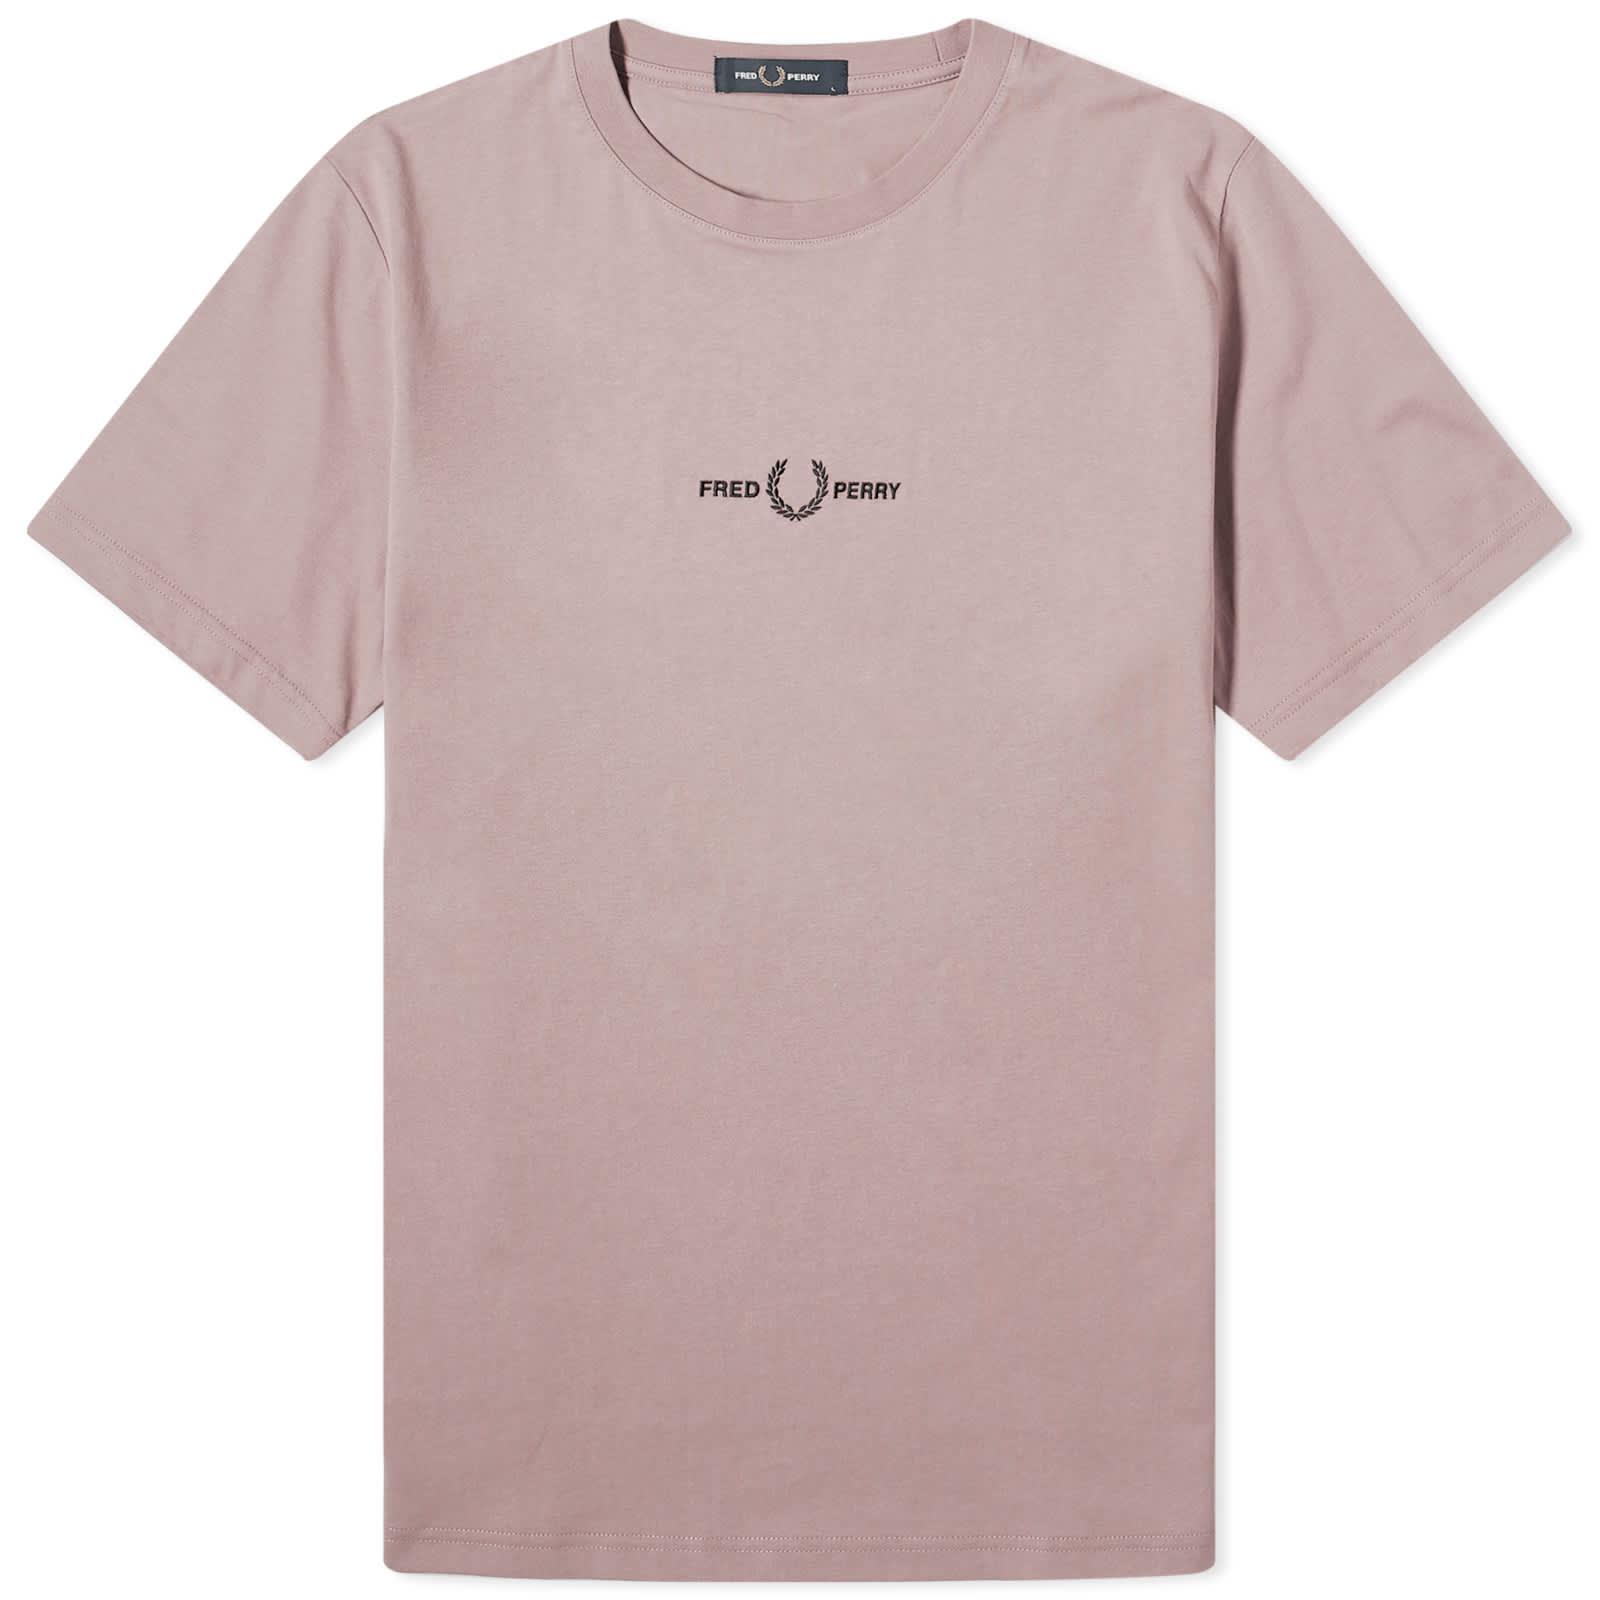 Футболка Fred Perry Embroidered, цвет Dark Pink футболка fred perry ringer цвет dark pink